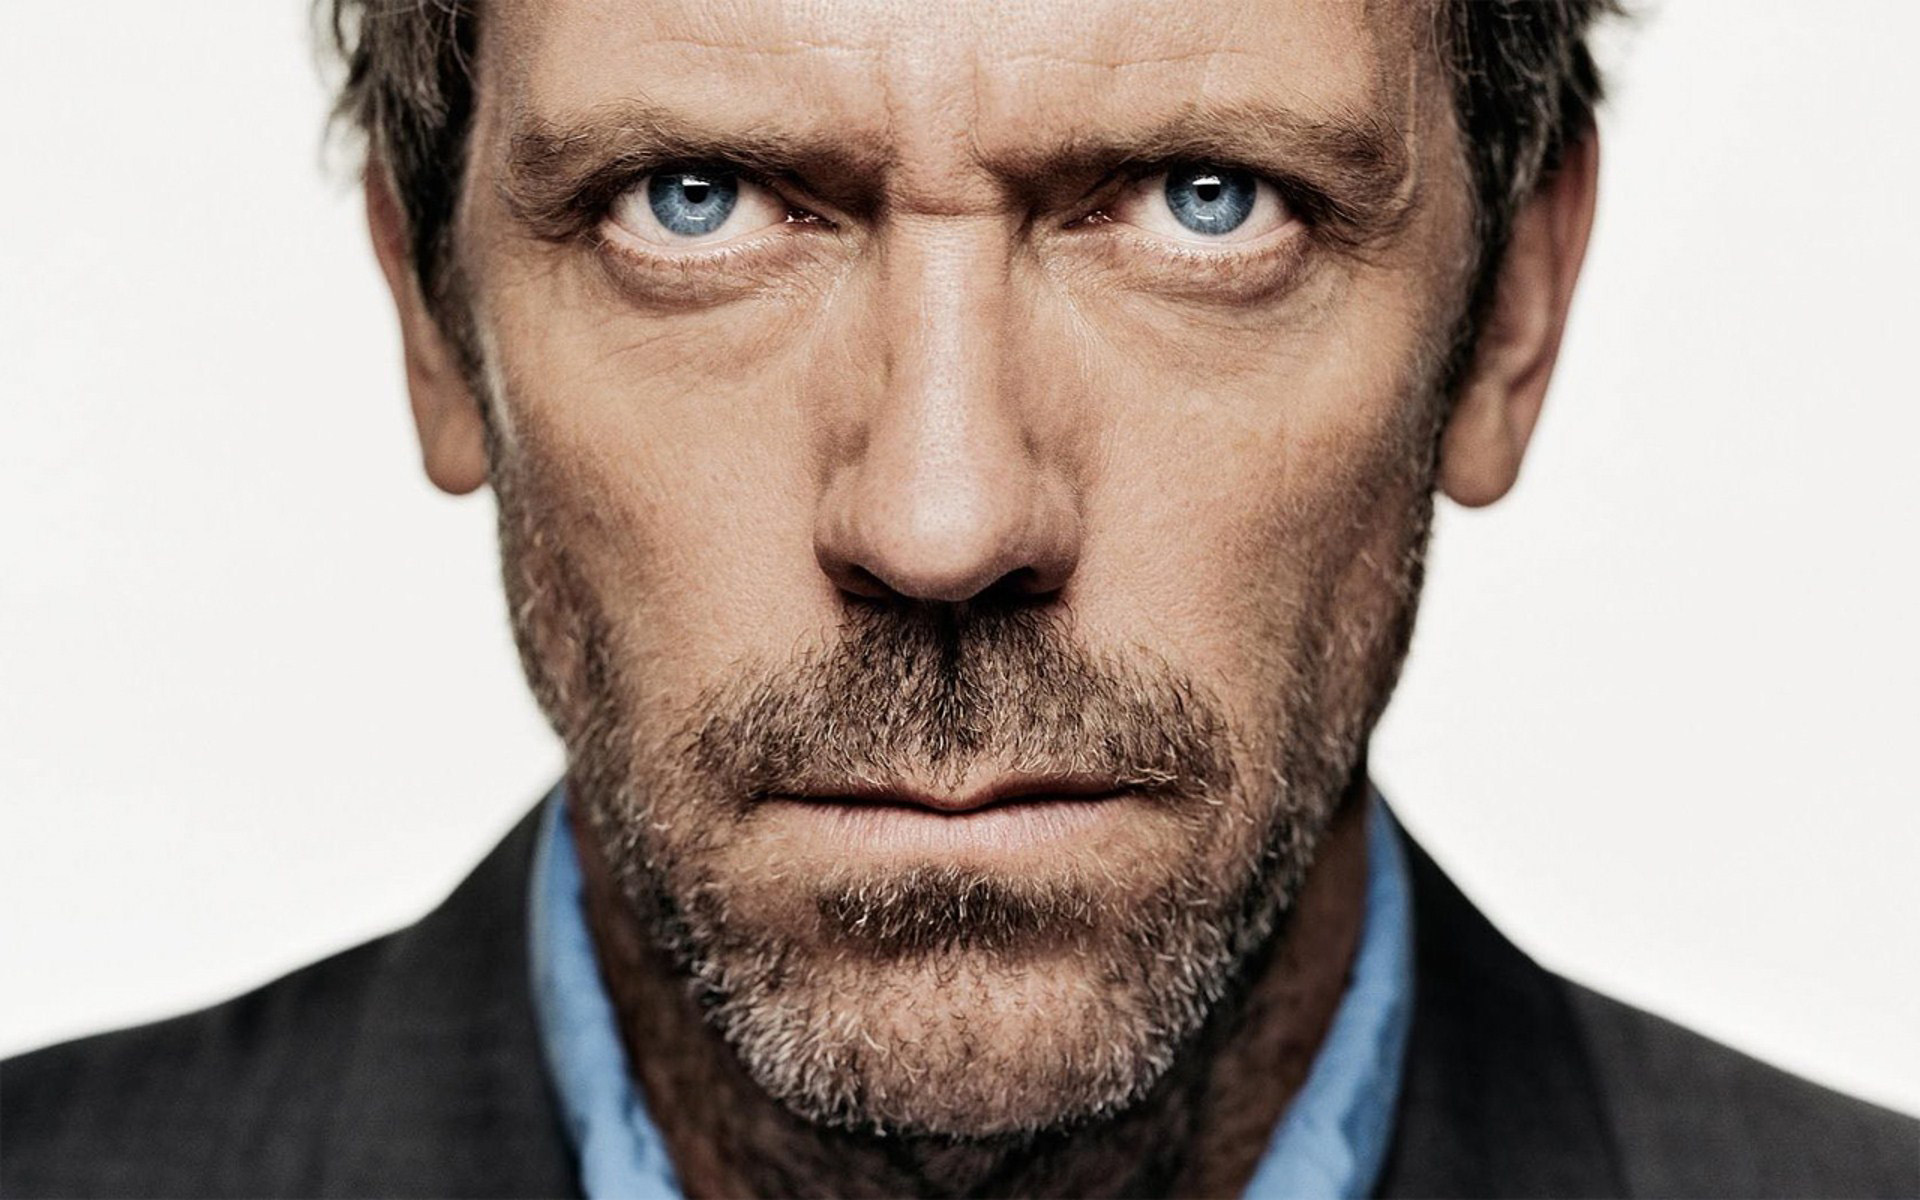 tv show, house, gregory house, hugh laurie wallpaper for mobile